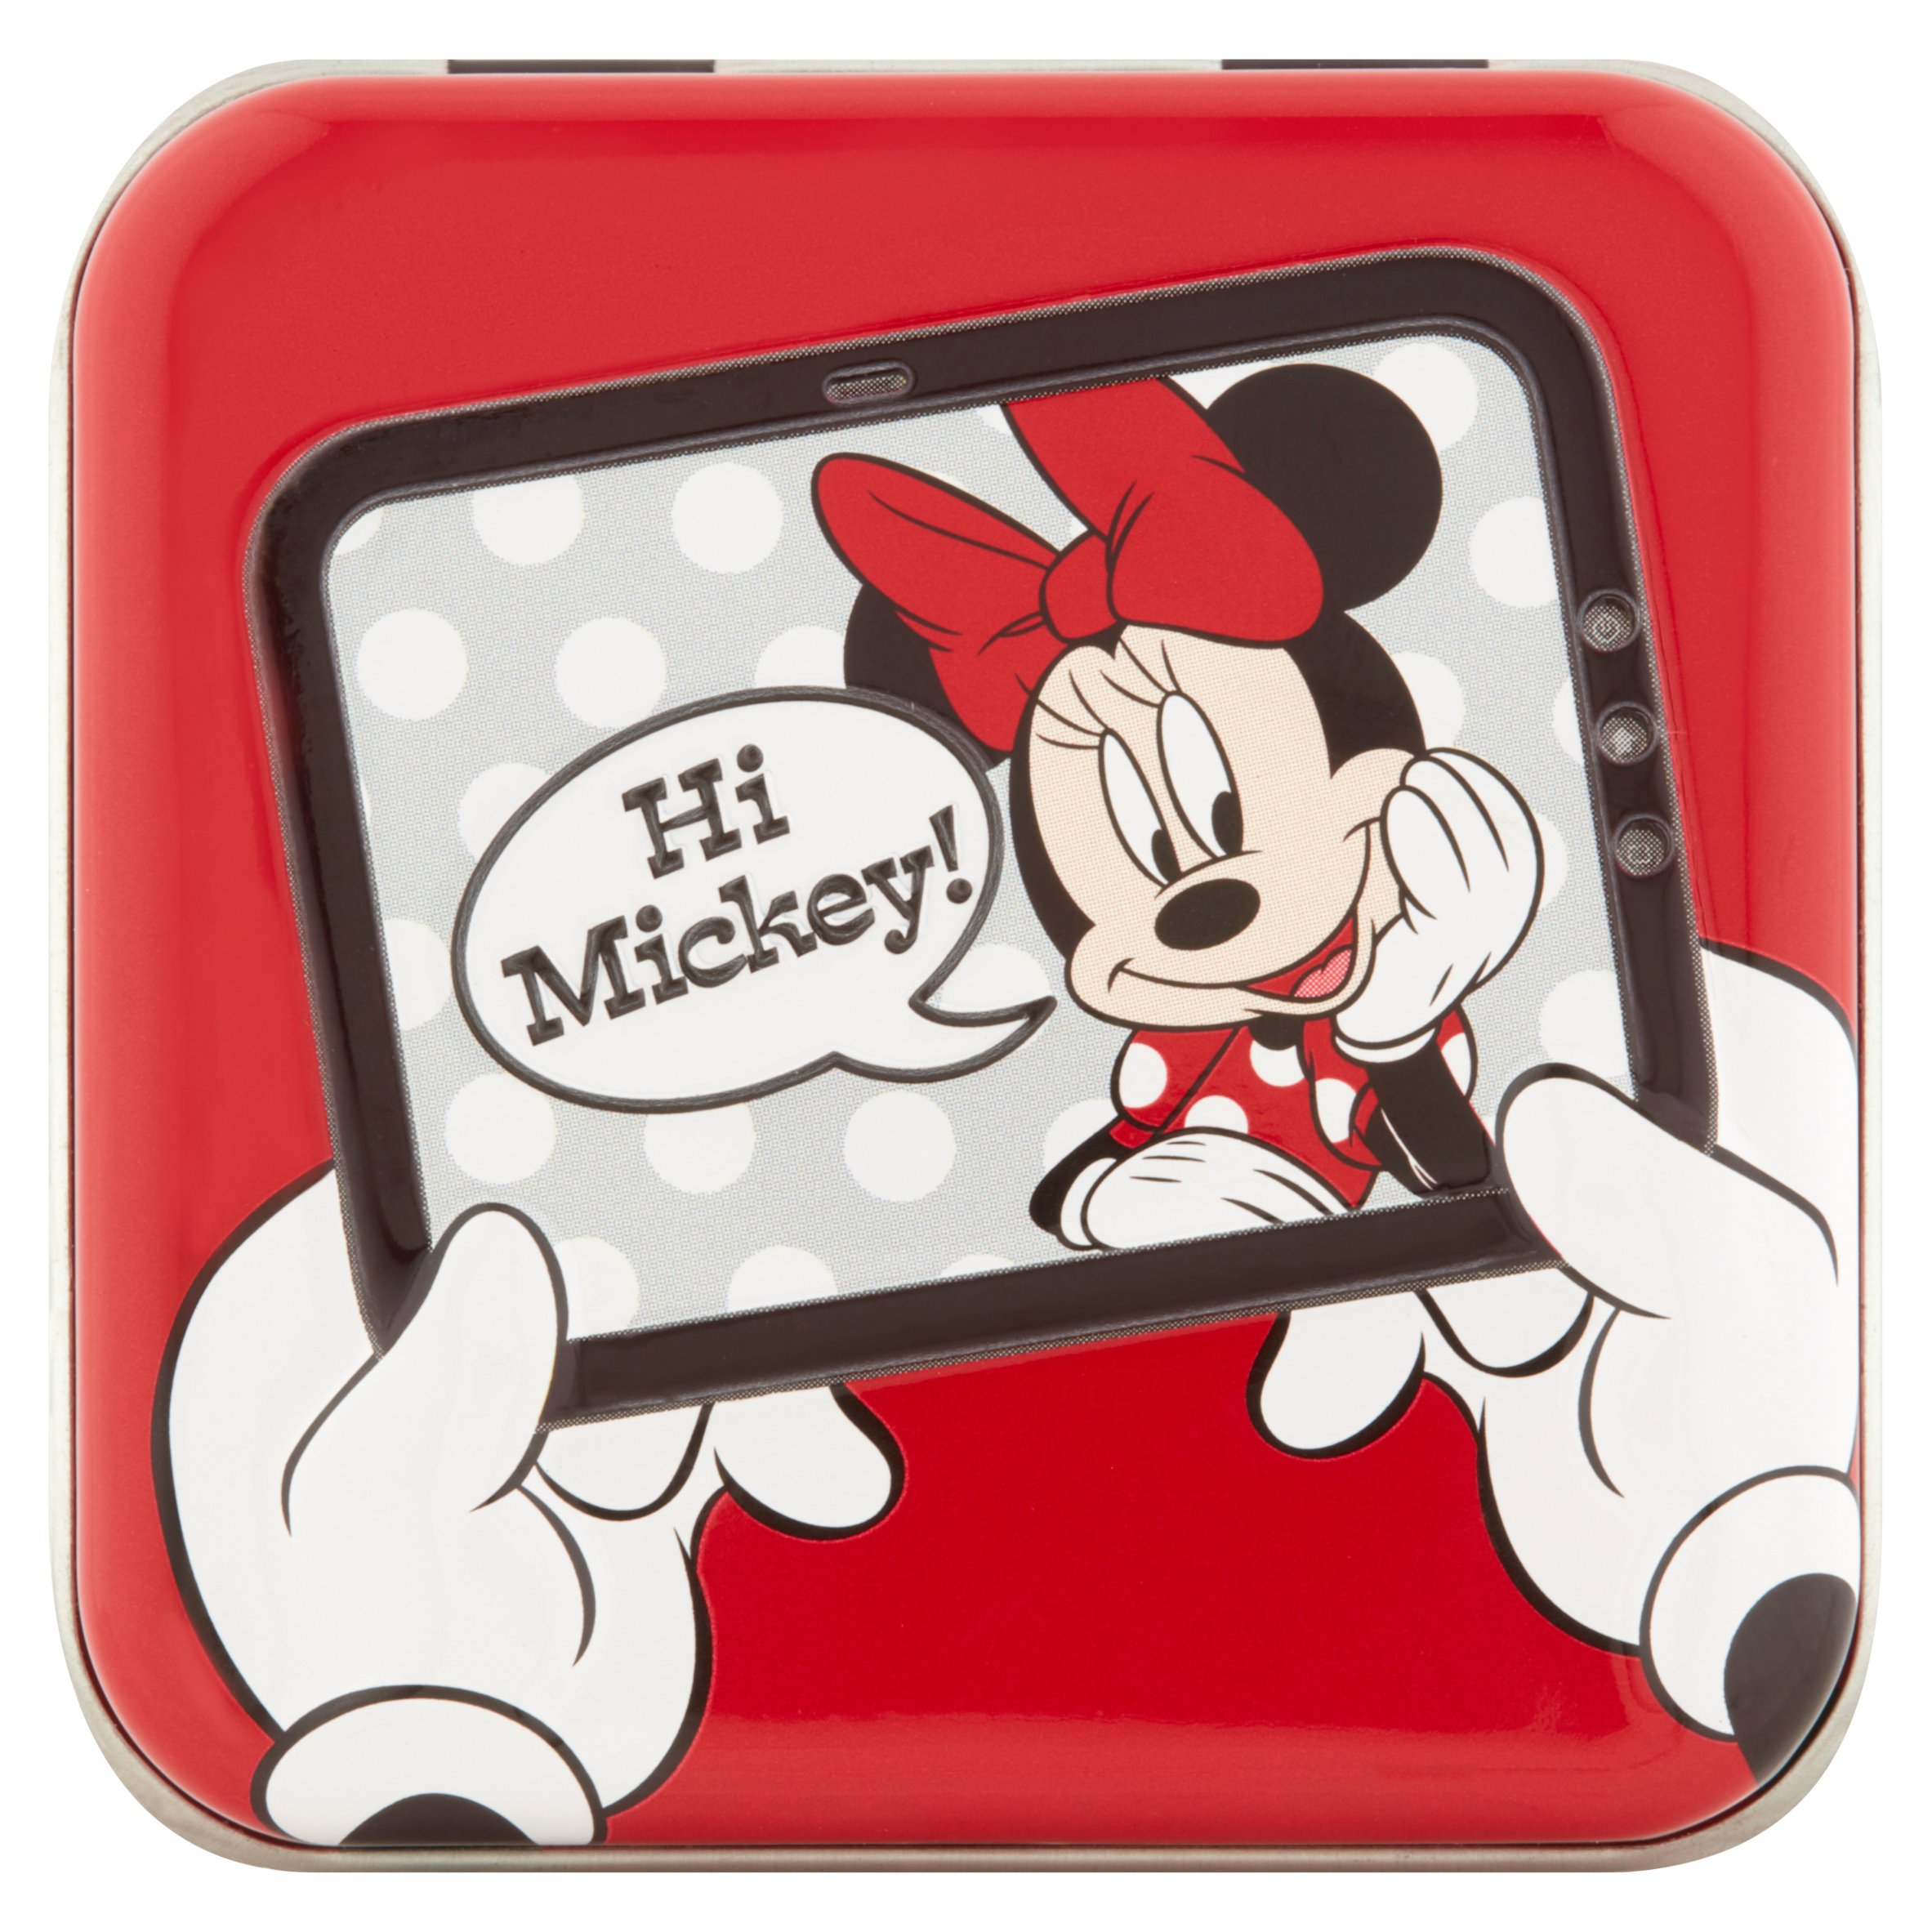 Cotton Buds Minnie Mouse Smart Phone Screen Cleaner Tablet - image 1 of 4